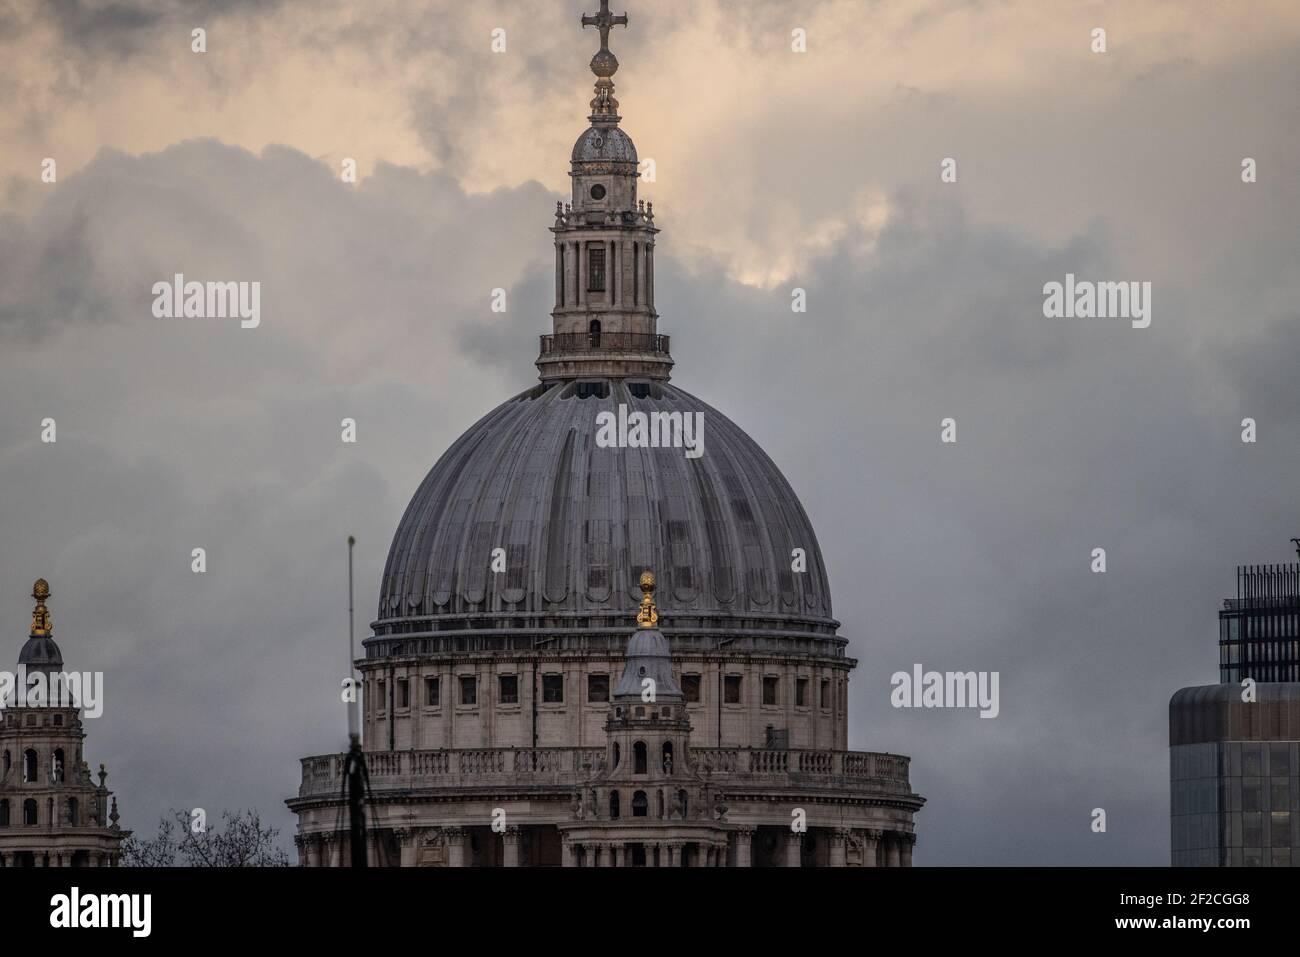 Dome of St Pauls's Cathedral, framed by the spires of Wren's City churches, London, England, UK Stock Photo